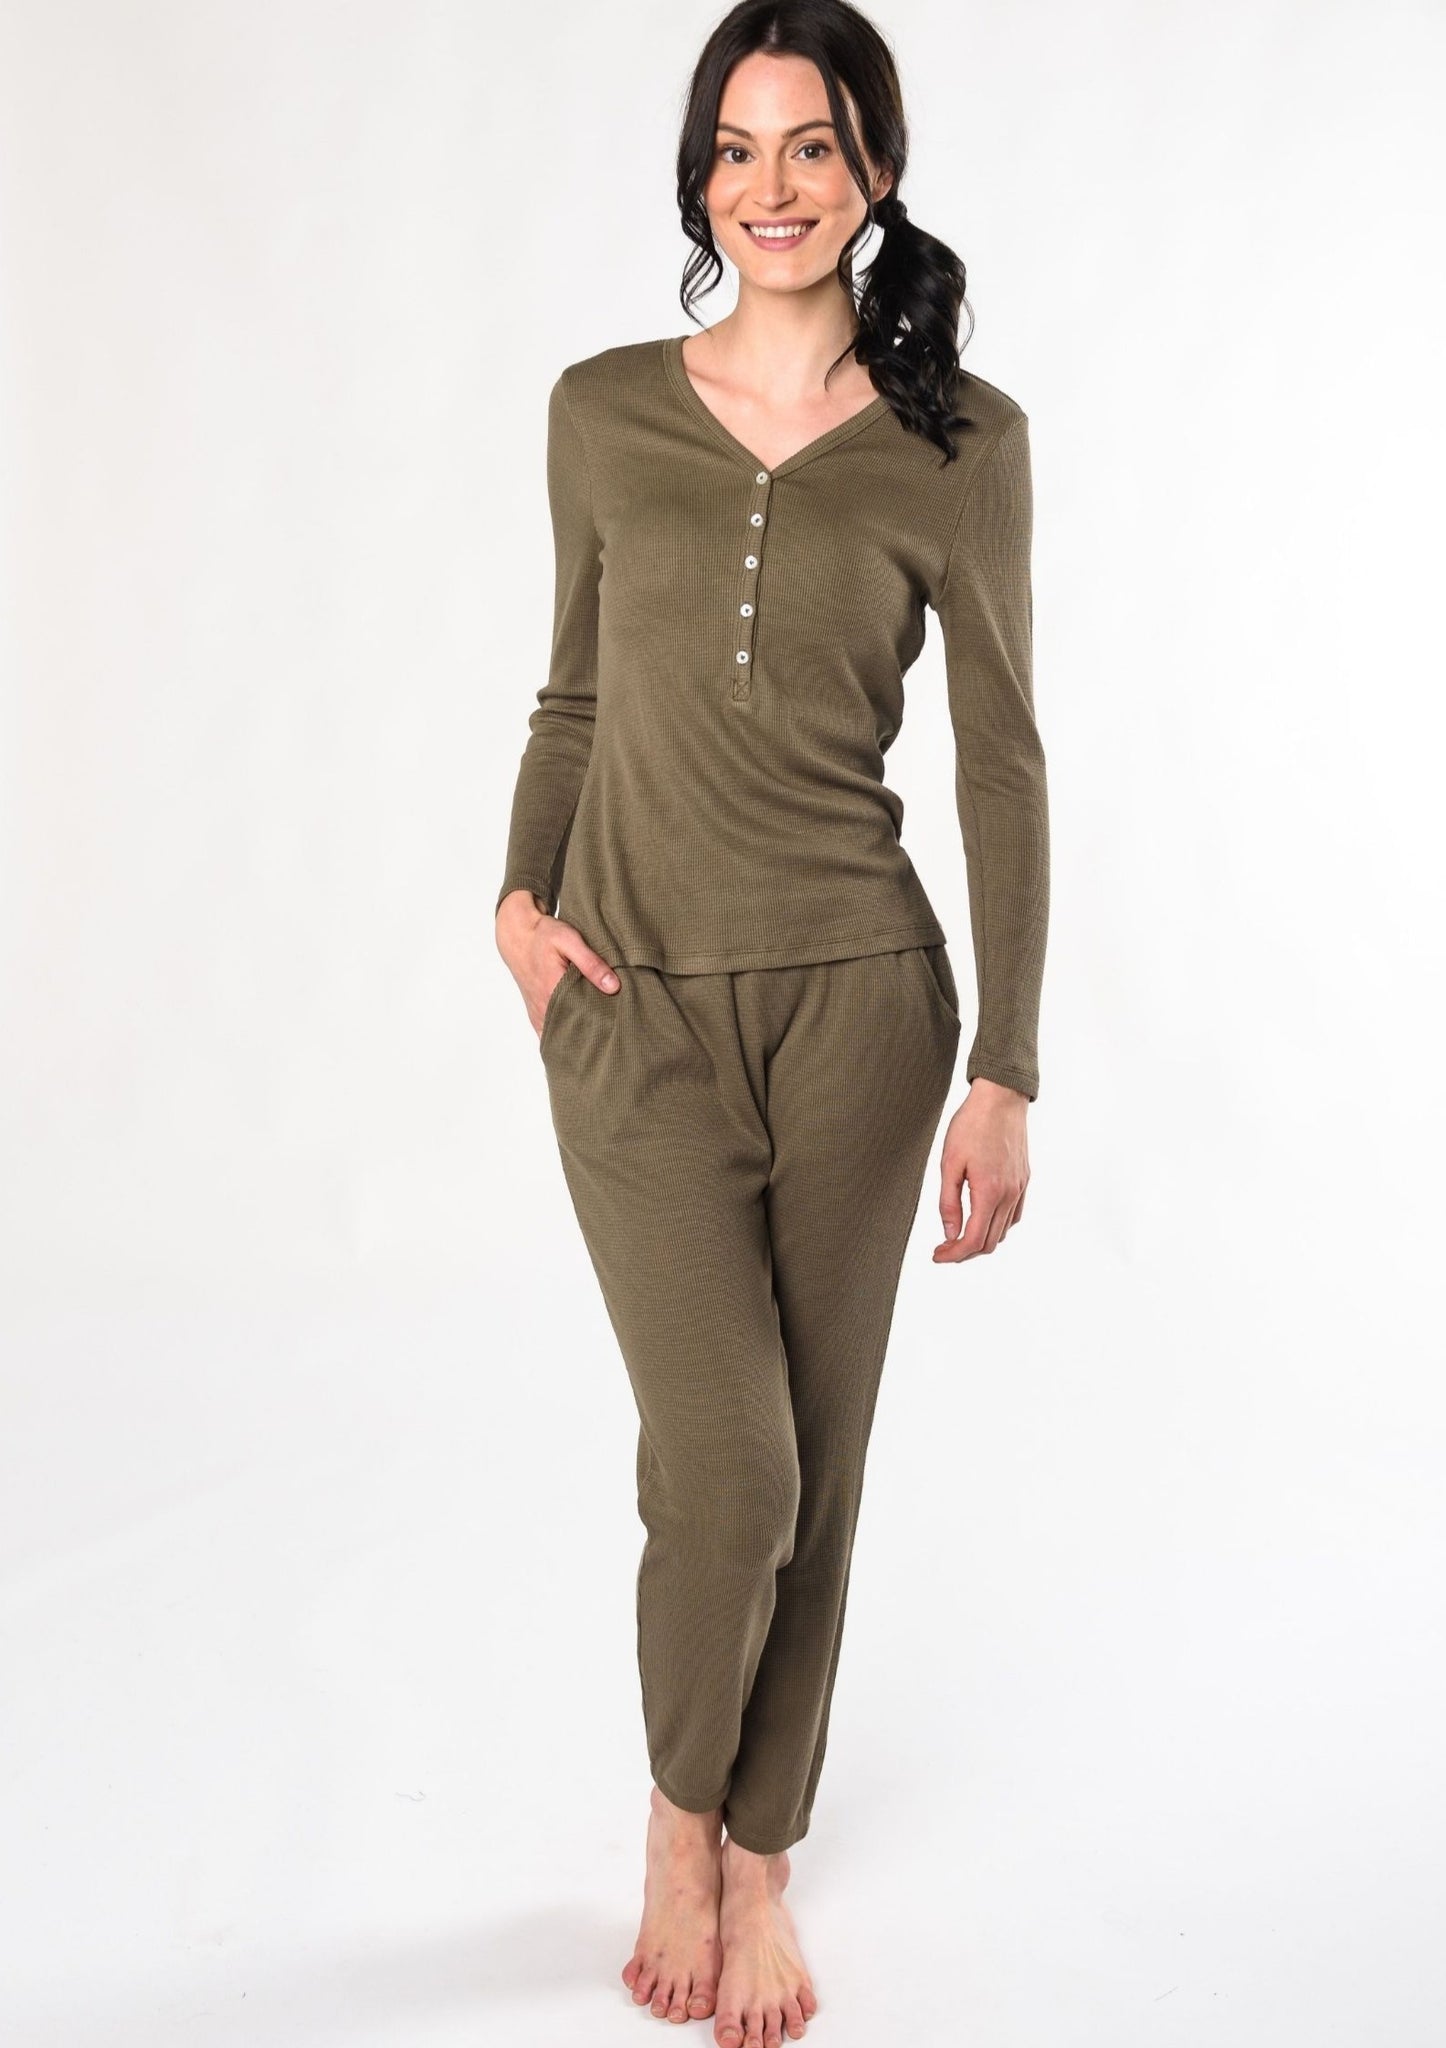 Shop comfortable loungewear and clothing for women. Find